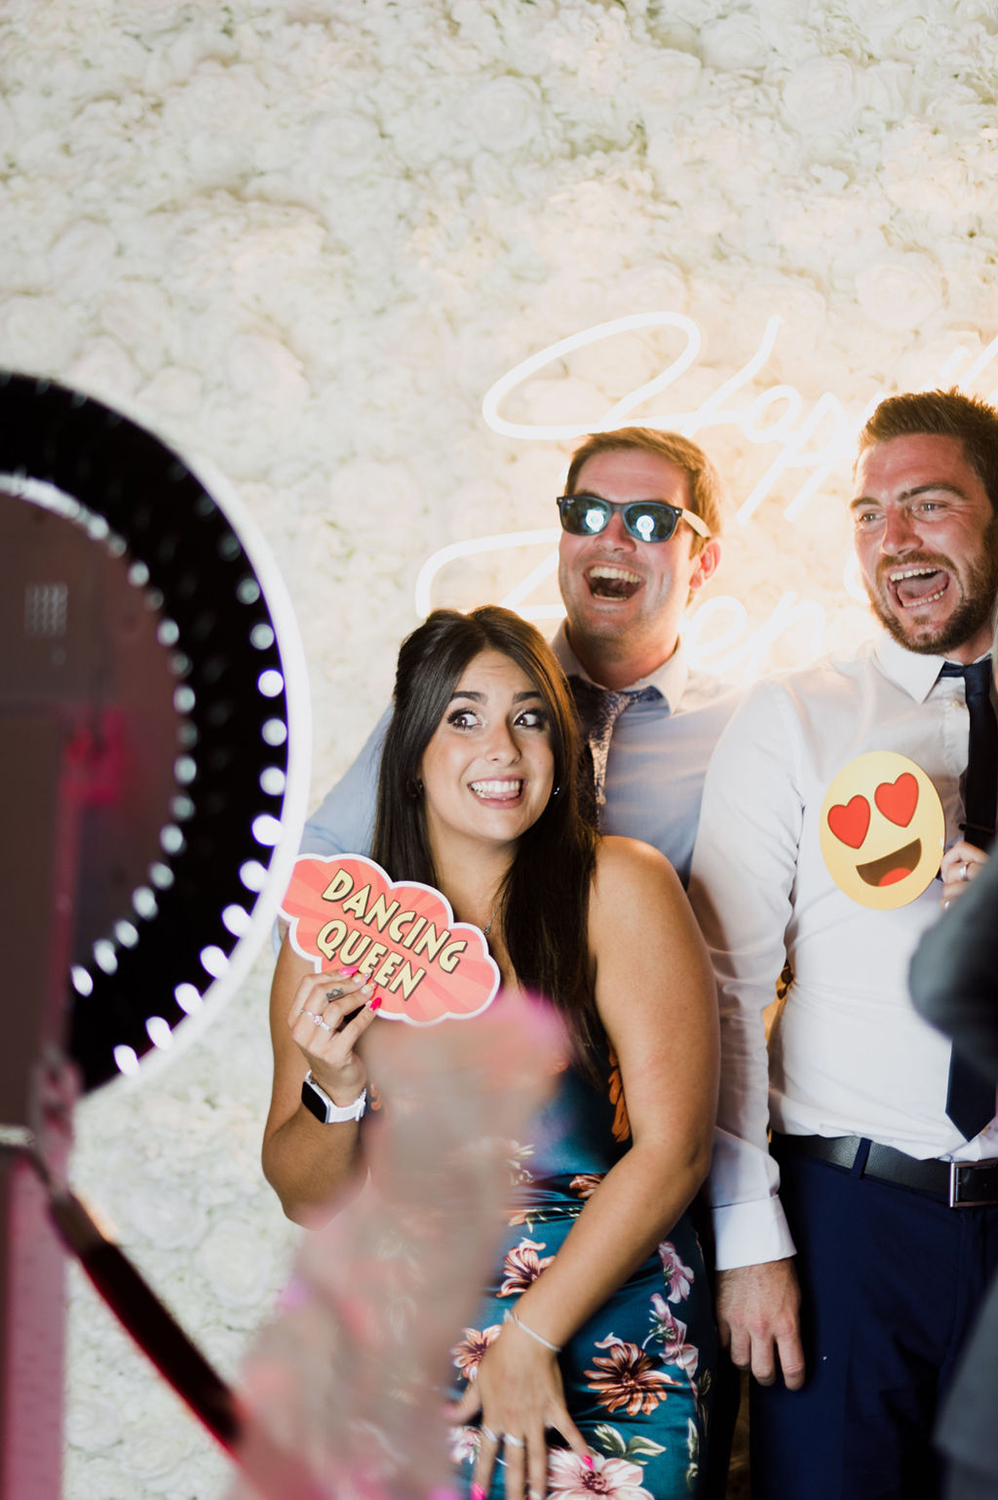 Liberty Pearl Photo & Film Collective Devon Wedding Photography at Deer Park Country House. Guests pose in photo booth.